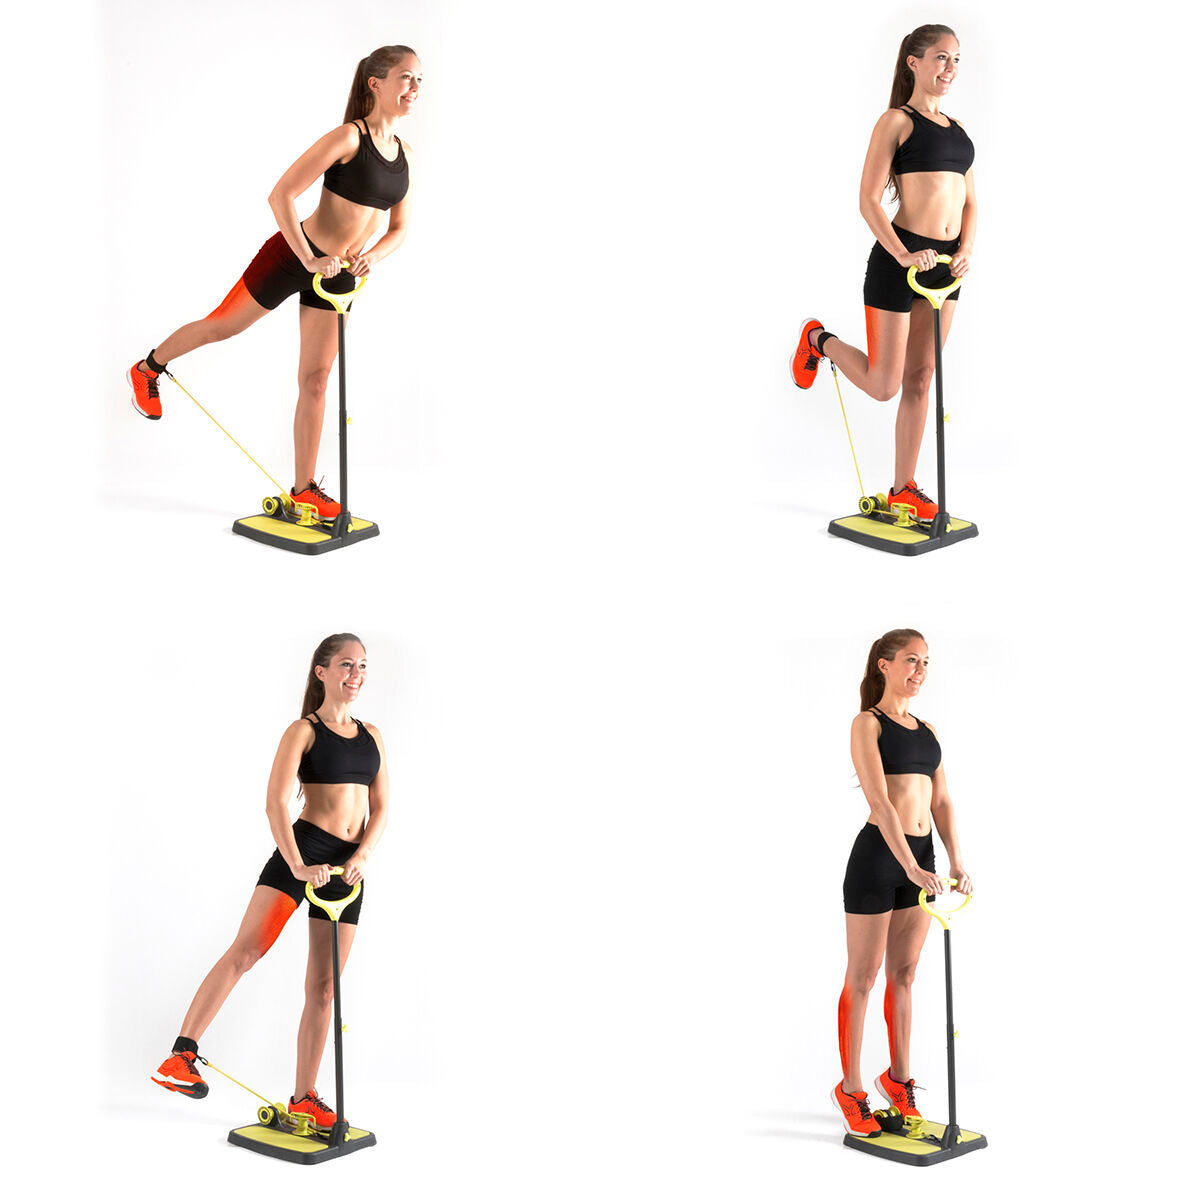 InnovaGoods Buttocks & Legs Fitness Platform with Exercise Guide